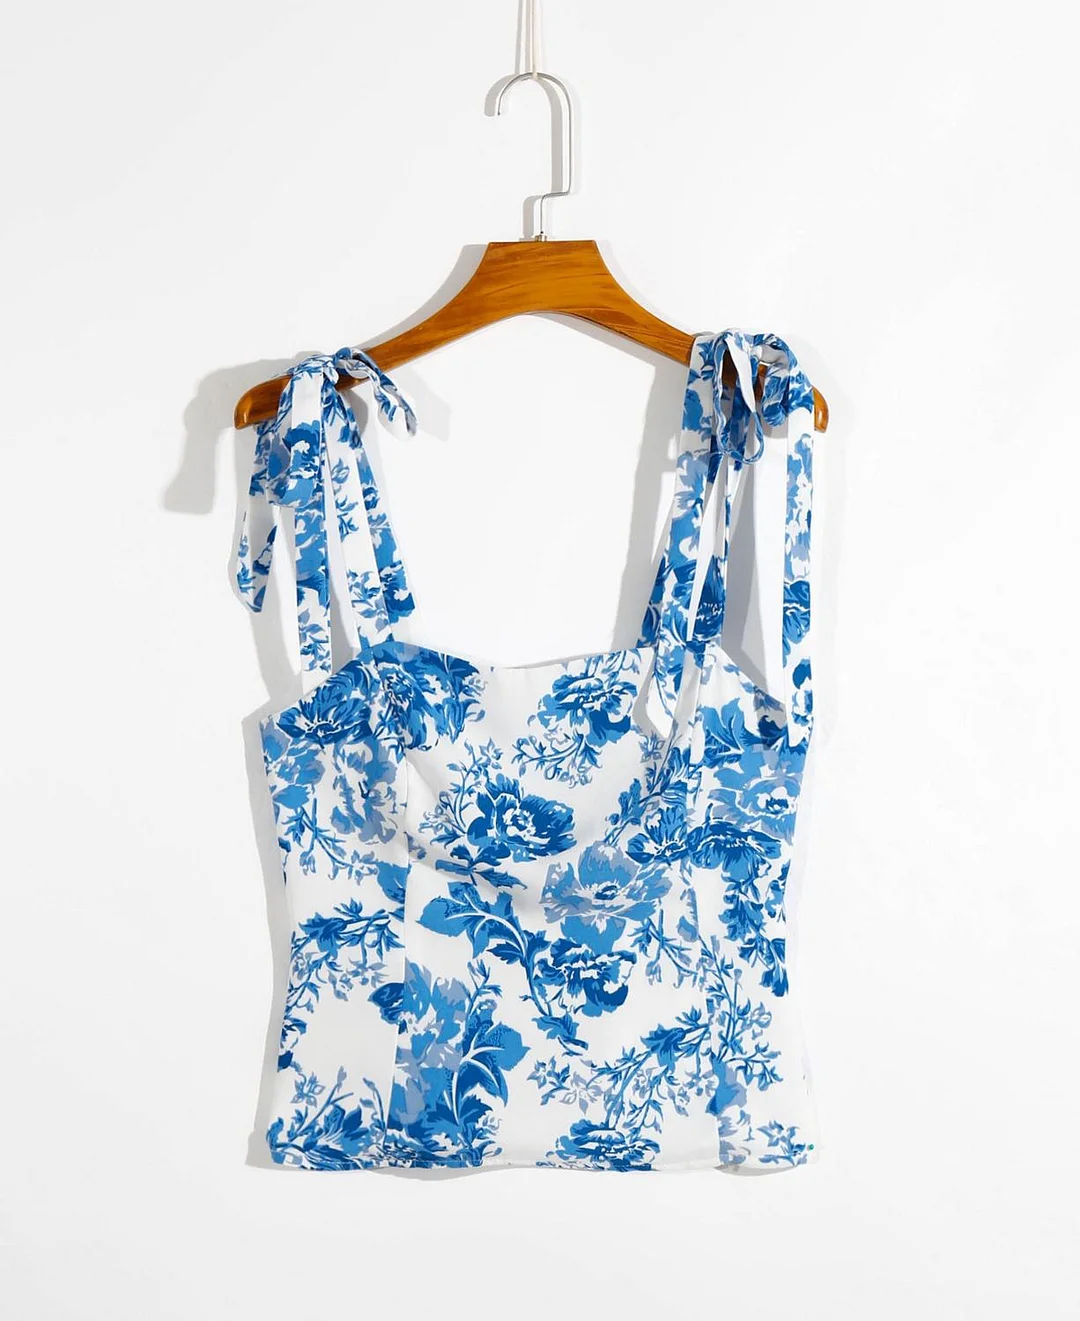 2020 Tie Bow Strap Blue White Floral Print Camis Women Summer Ruched Short Tank Tops Retro Cool Girl Sexy Slim Crop Top Tees